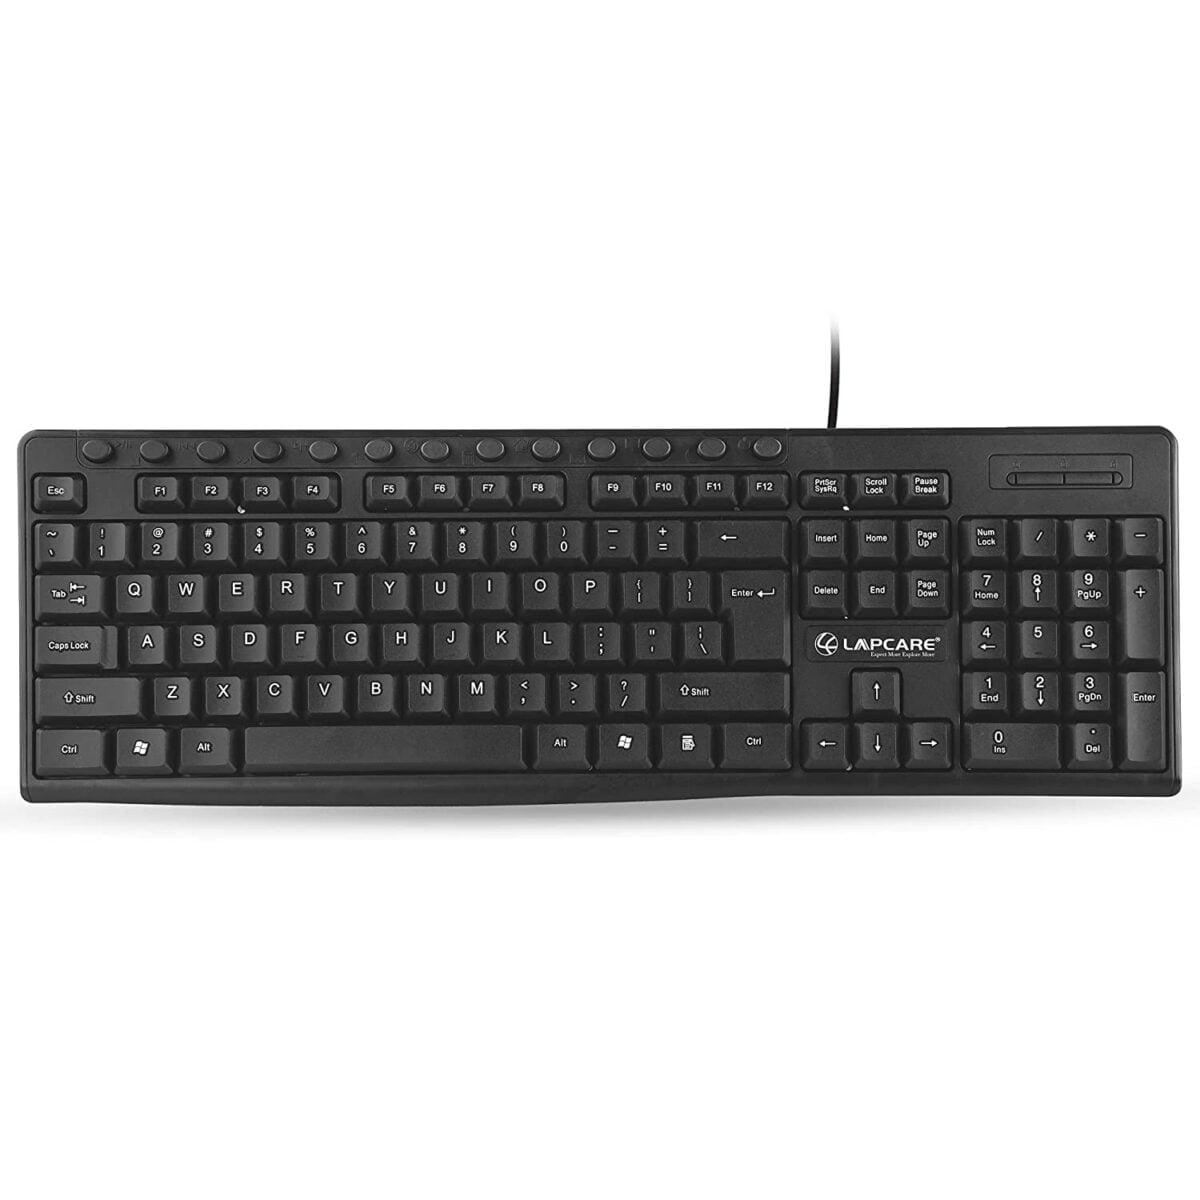 LAPCARE E9 Wired USB Multi device Keyboard Black · For all · Case Material plastic · Size Standard · Interface Wired USB · Multimedia Keys 1 Shop Mobile Accessories Online in India